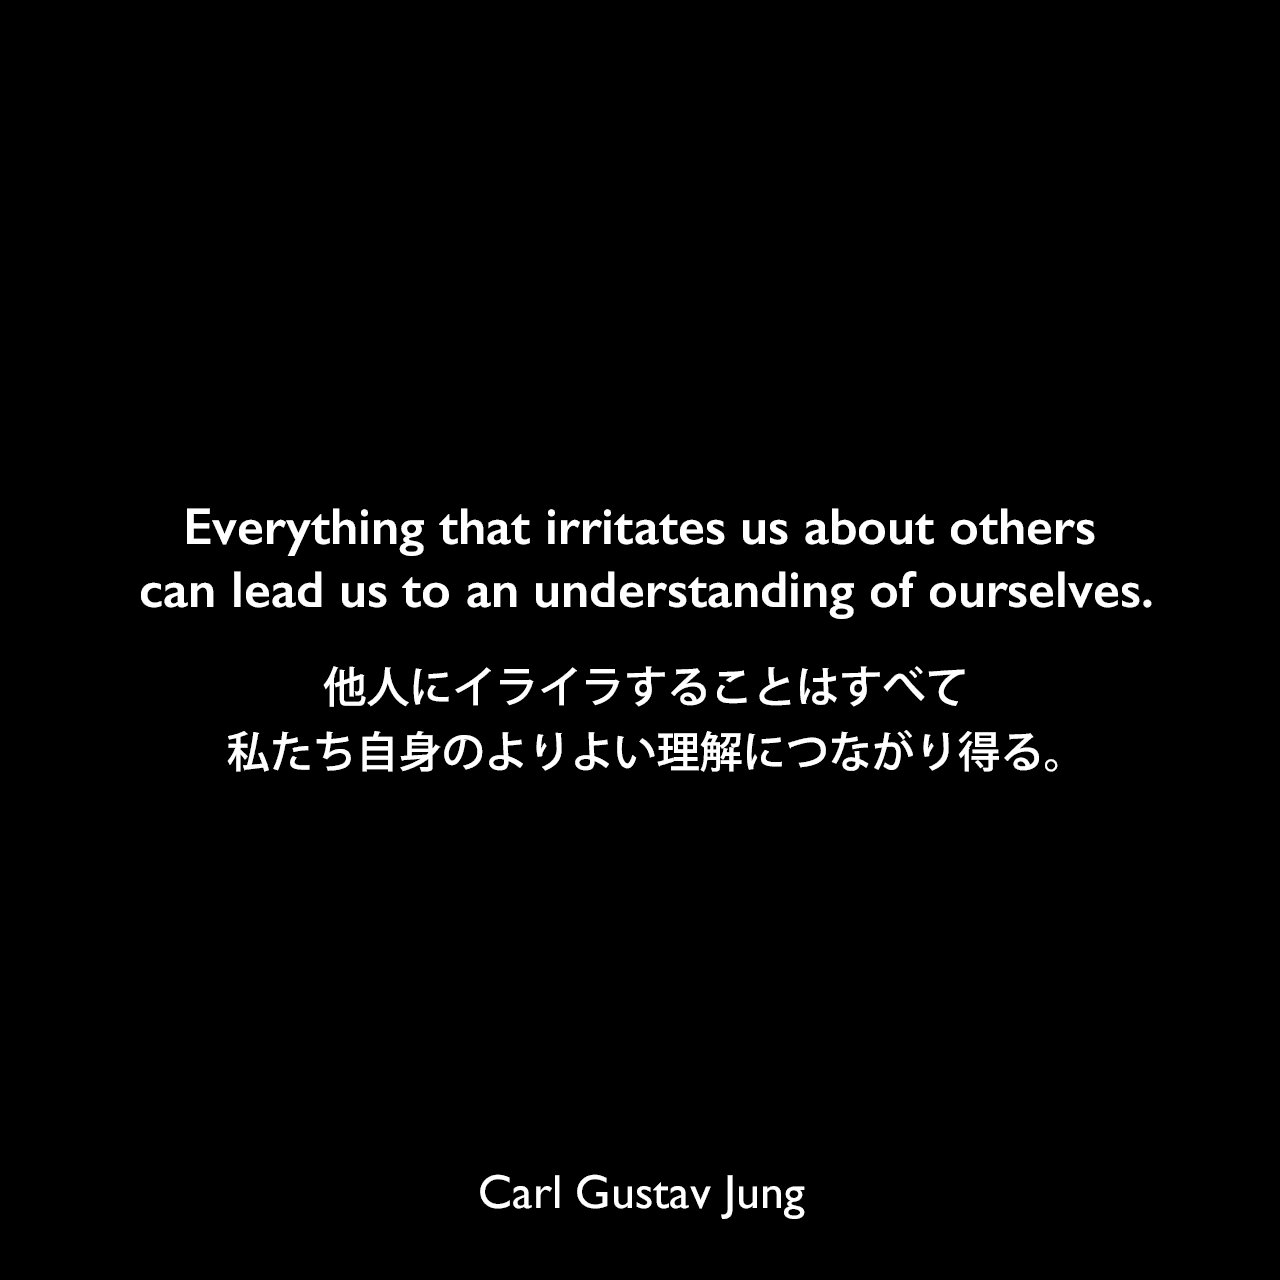 Everything that irritates us about others can lead us to an understanding of ourselves.他人にイライラすることはすべて、私たち自身のよりよい理解につながり得る。- ユングによる本「Memories, Dreams, Reflections」よりCarl Gustav Jung